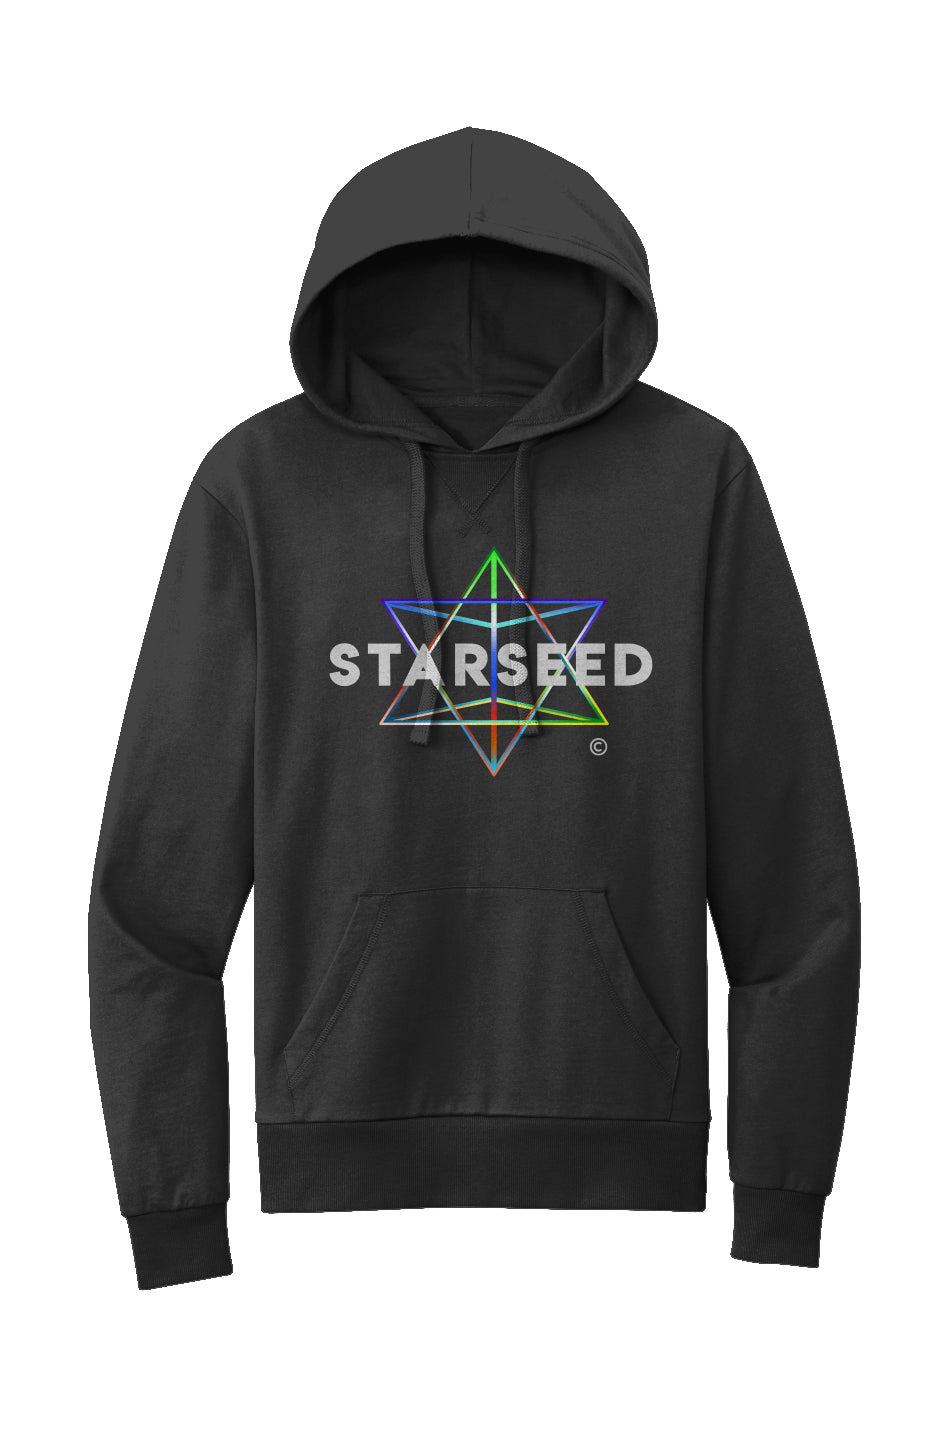 the starseed collection: organic cotton, unisex, pullover hoodie